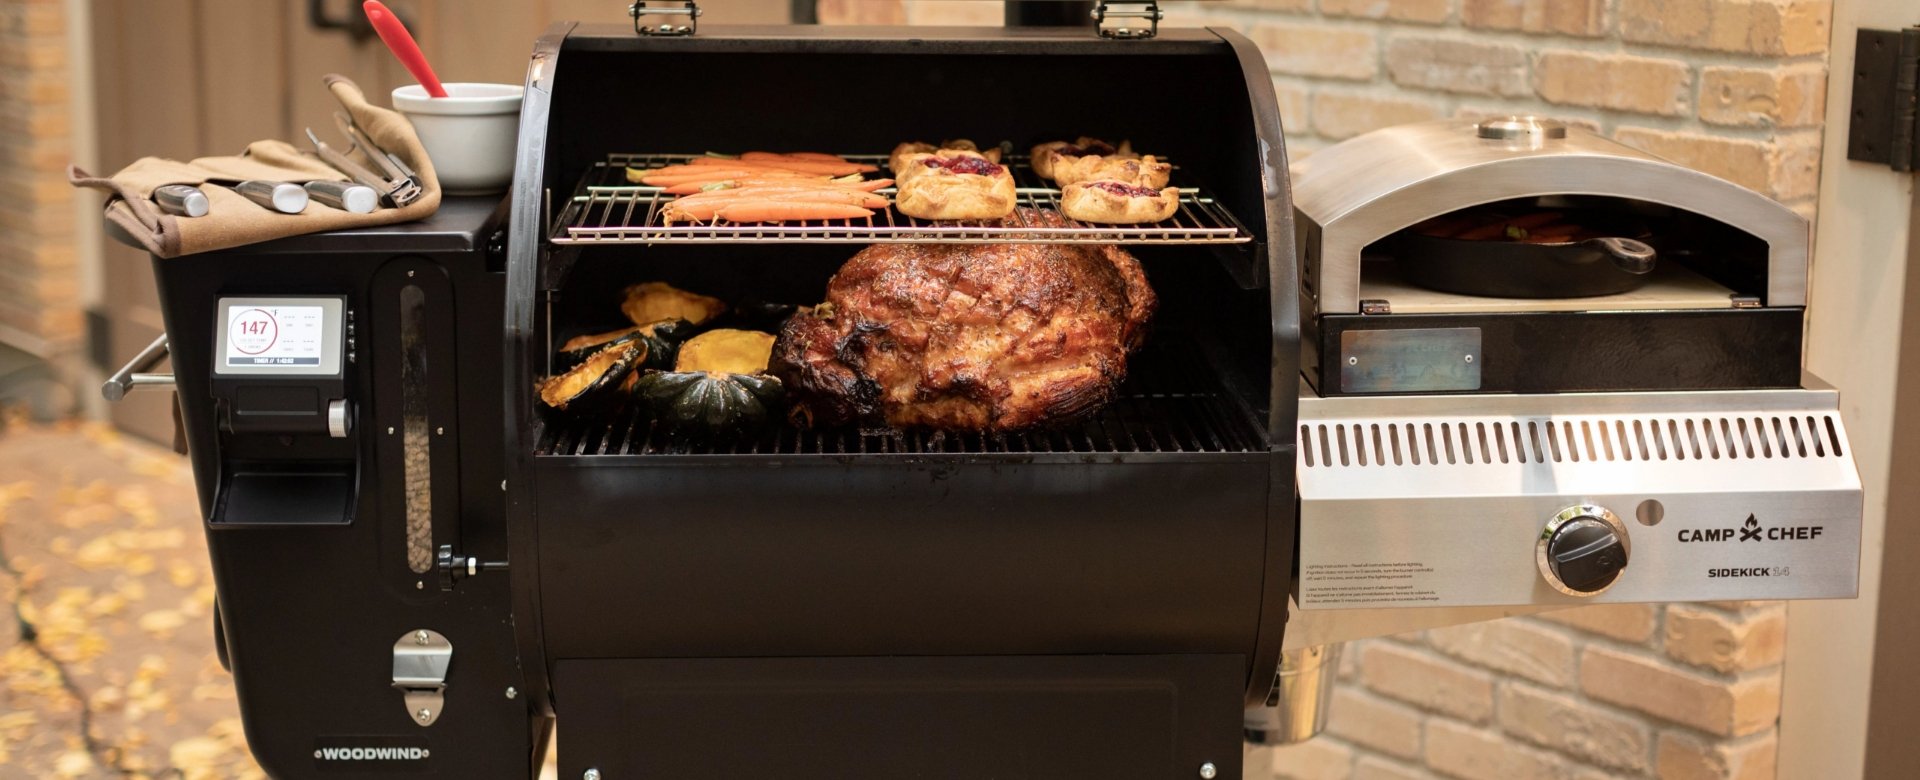 What Can You Cook on a Pellet Grill?